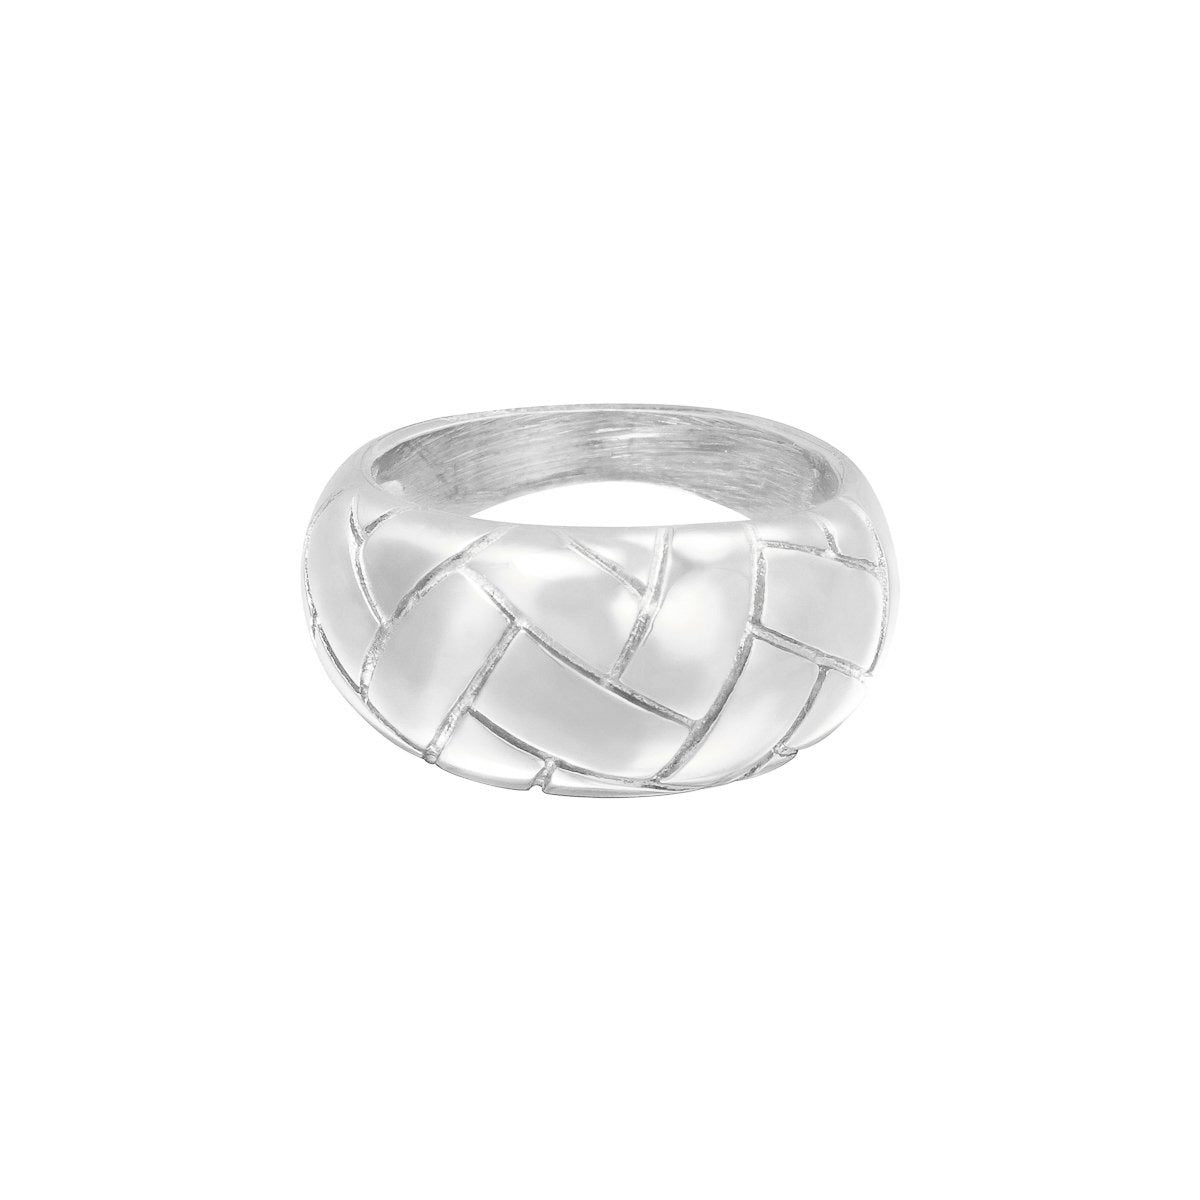 Cecile Ring Gold and Silver - new arrivals, Rings, Rings Gold, Rings Silver - Cecile Ring Gold and Silver - ANNABO Online Store